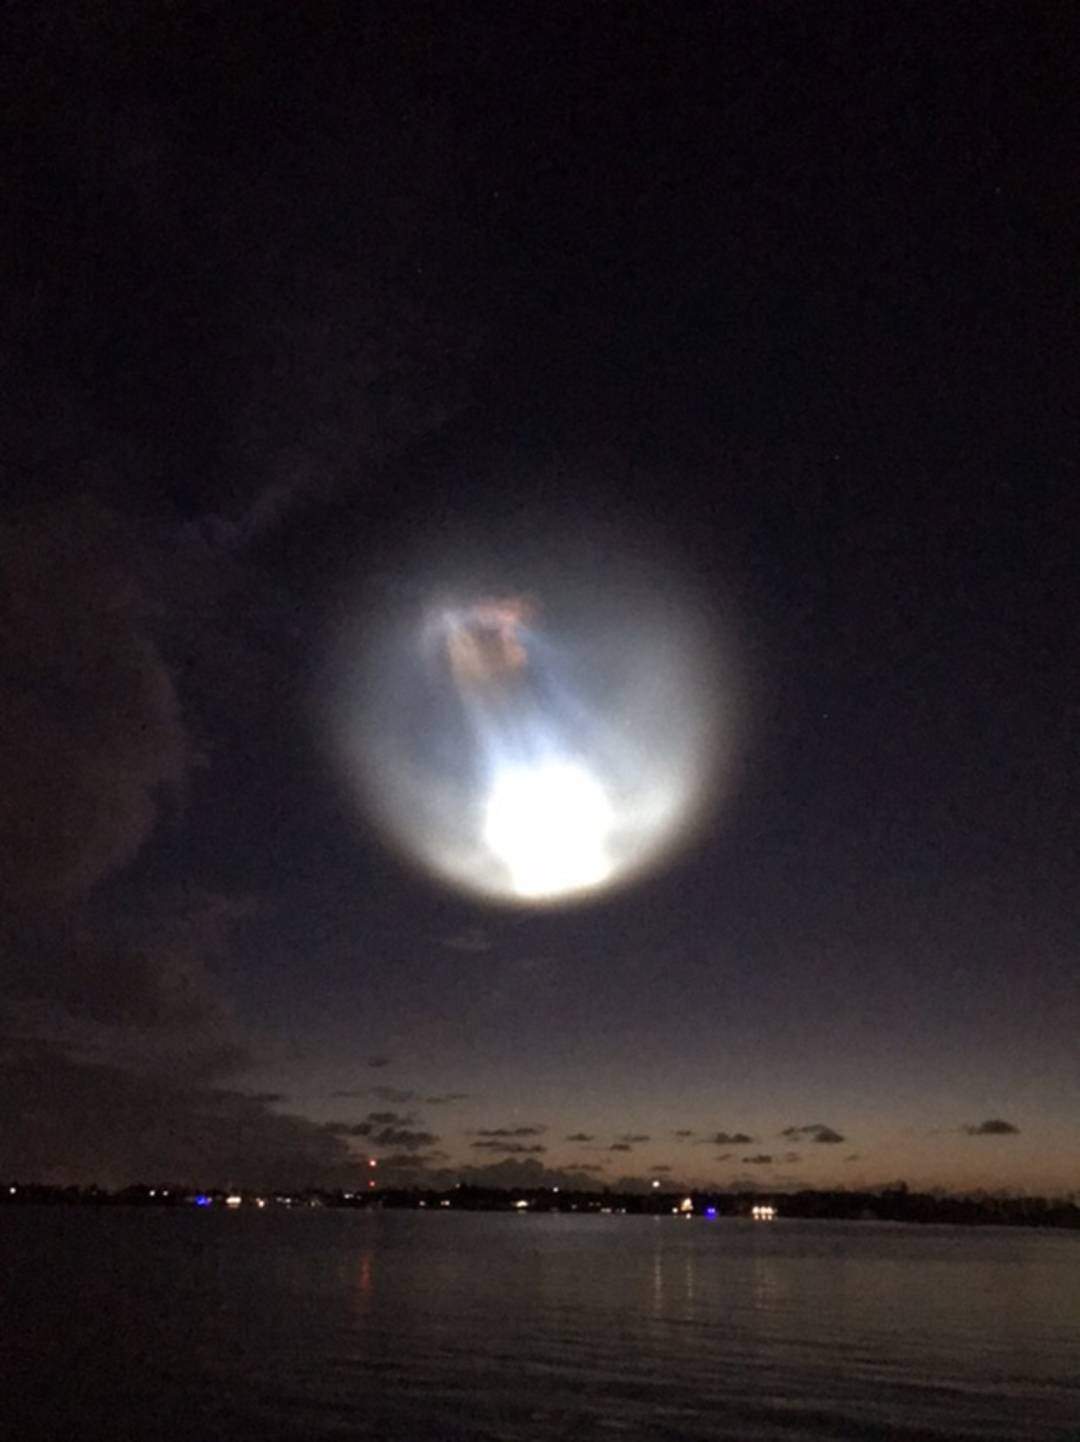 What were those clouds over Central Florida? Saturday’s SpaceX launch created weird clouds in the sky